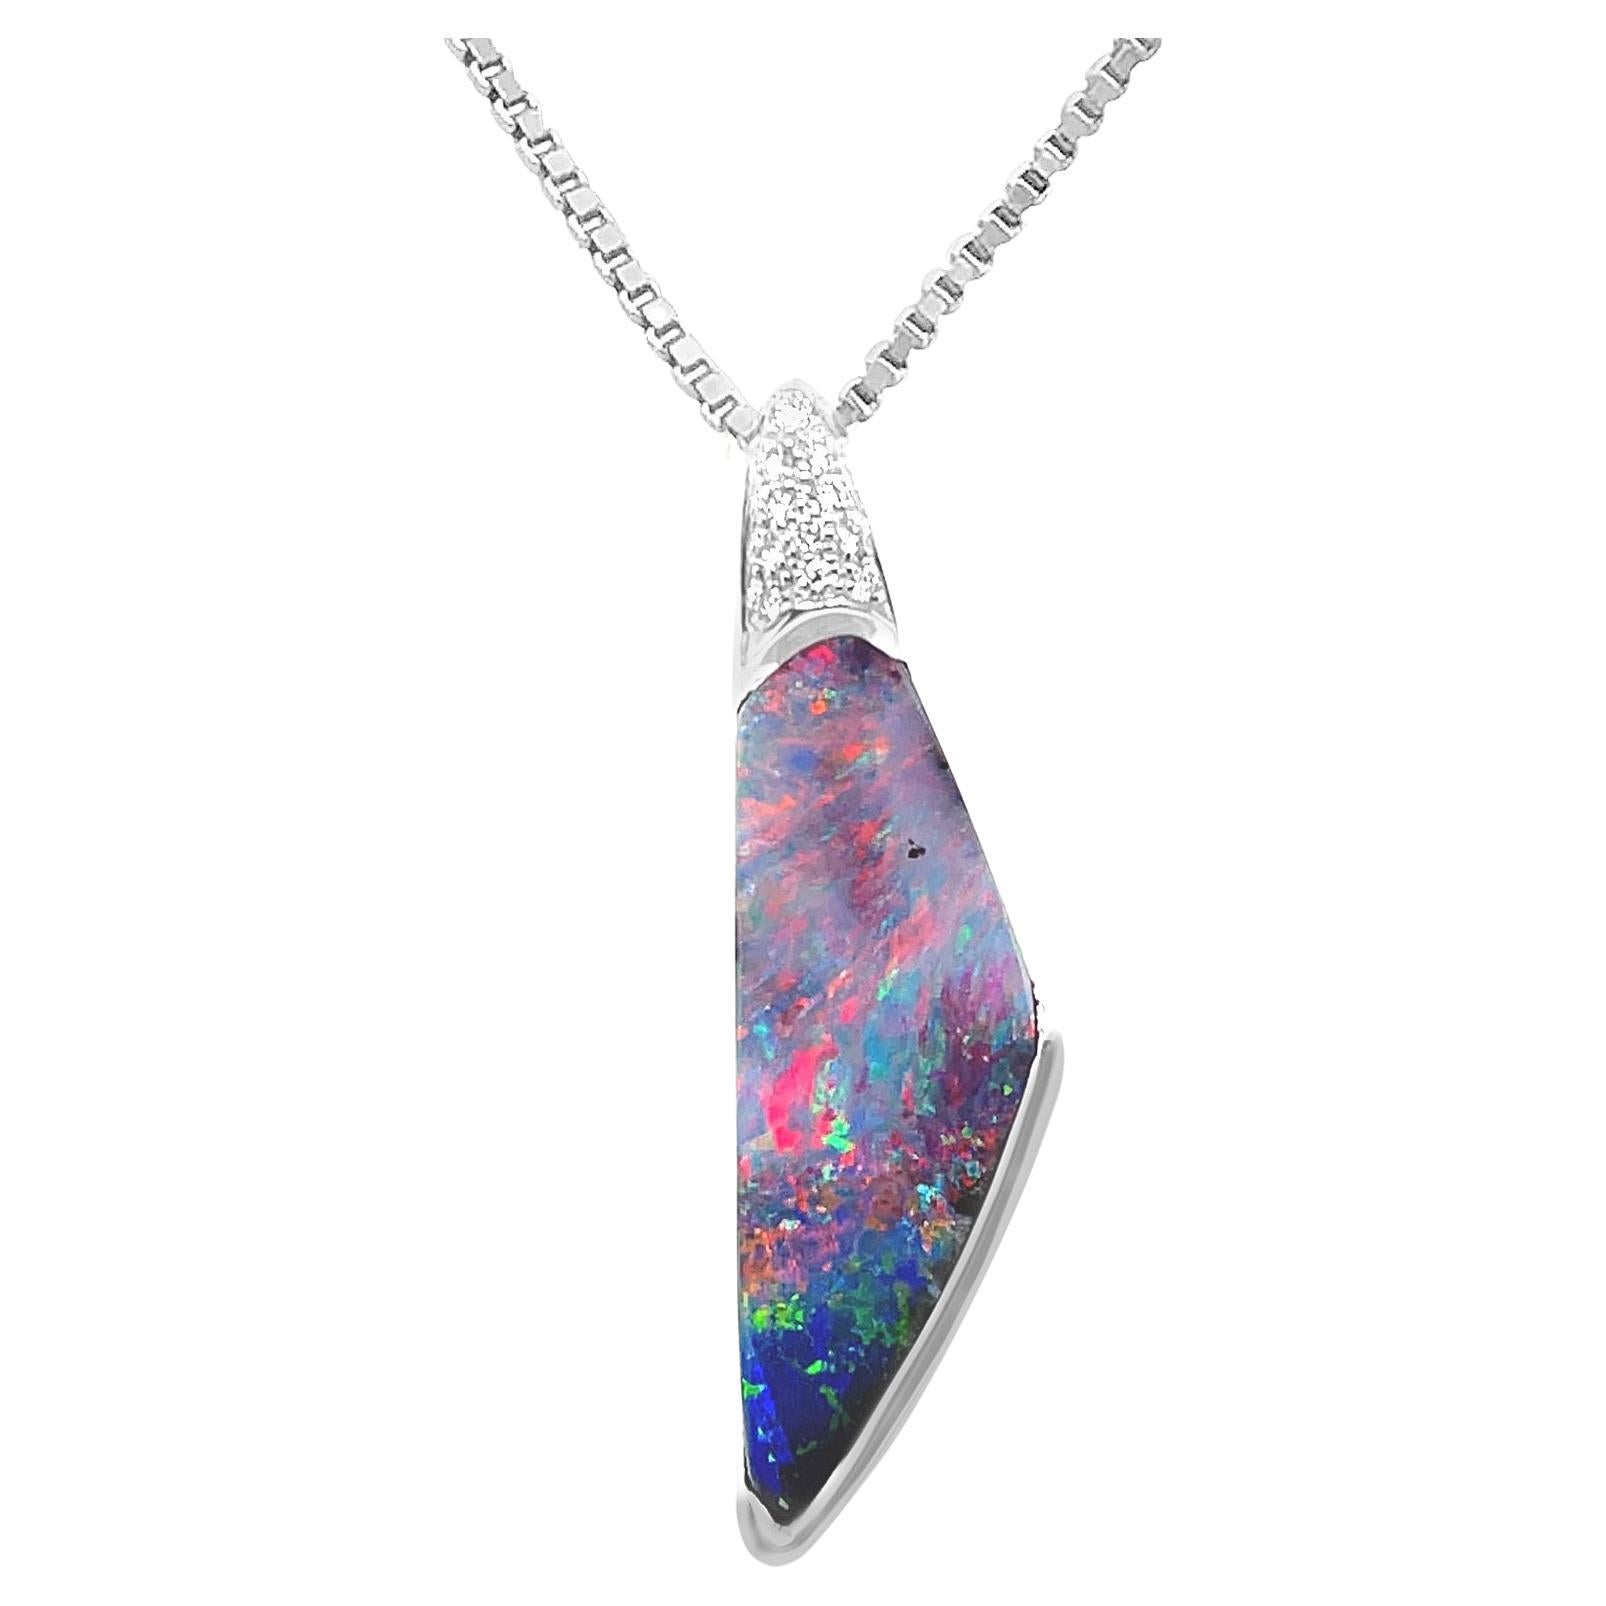 Australian 6.42ct Boulder Opal Pendant Necklace in 18K White Gold with Diamonds